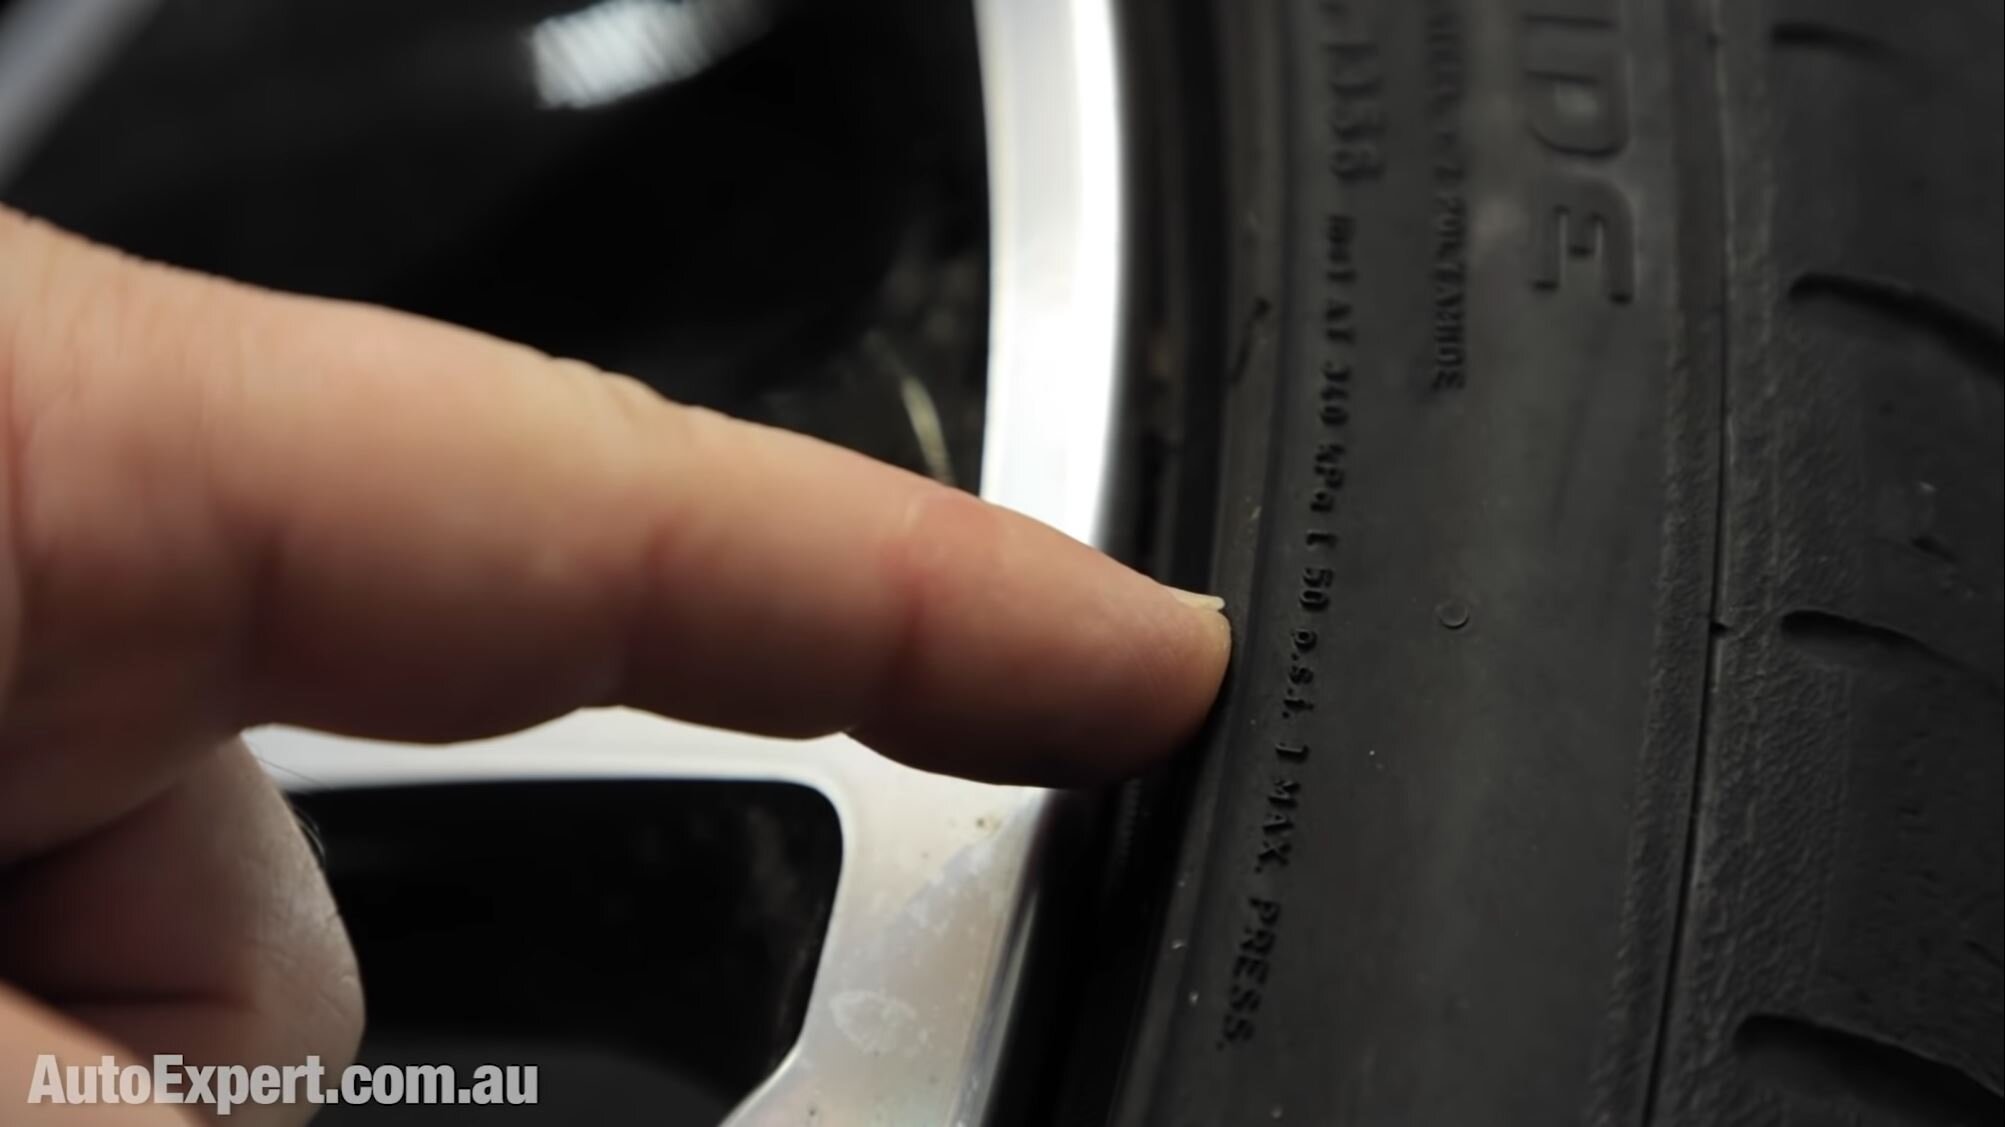 Learn to read your tyre sidewall for info.